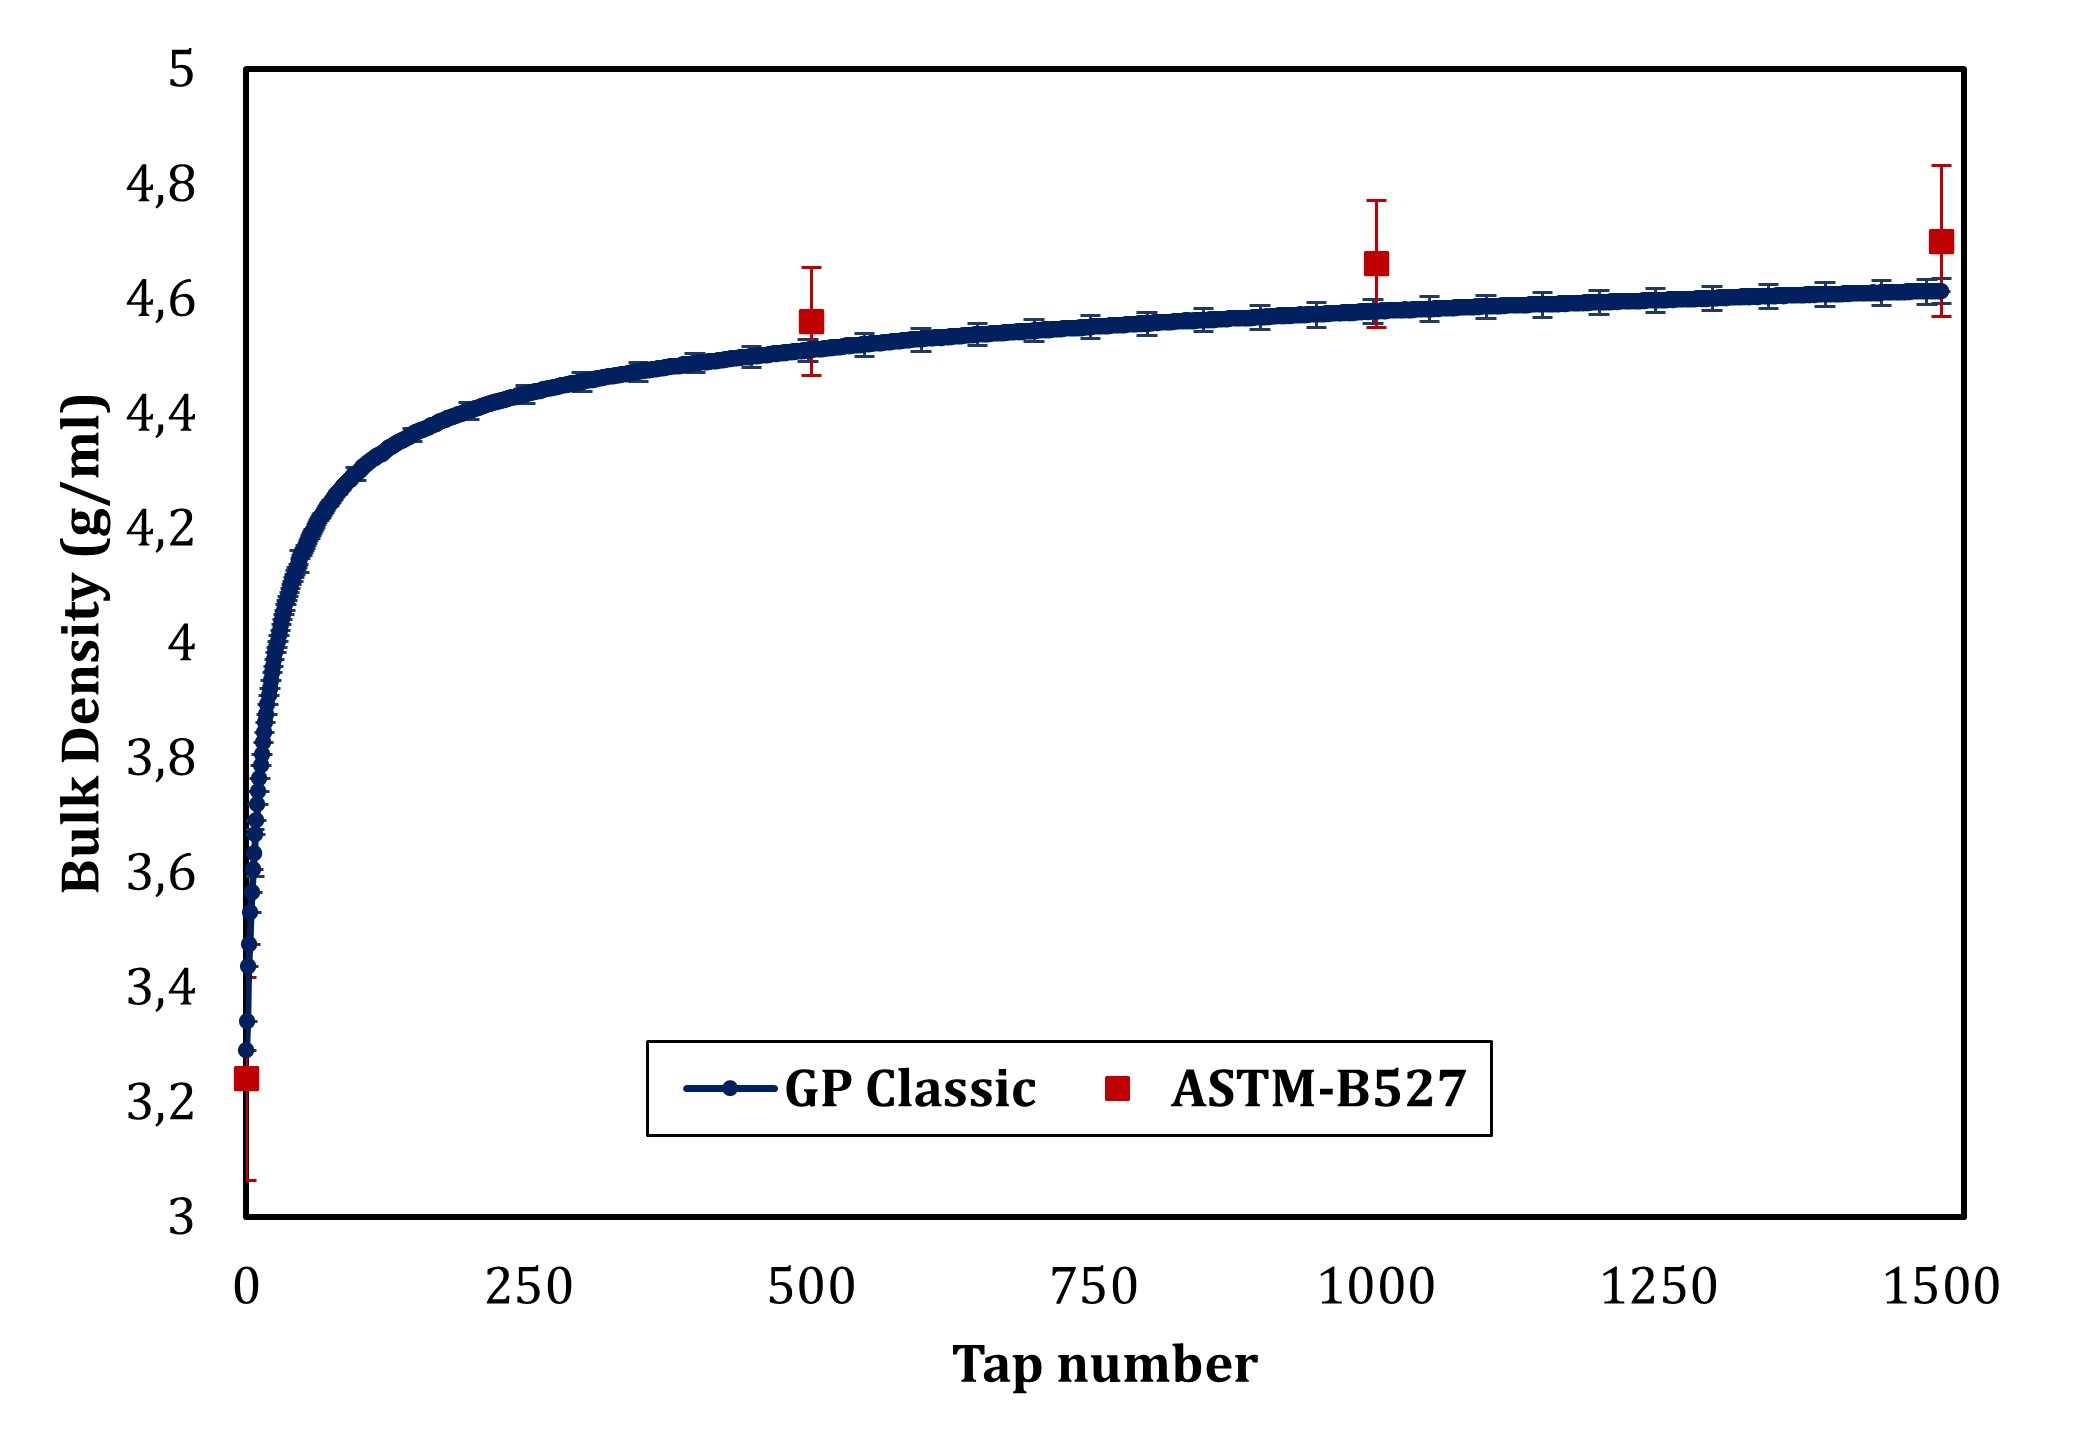 Bulk density versus tap number measured with the GranuPack Classic and the ASTM-B527 procedures for the sample SS316L (<22 µm). Error bars are standard deviations around the mean computed over three independent tests